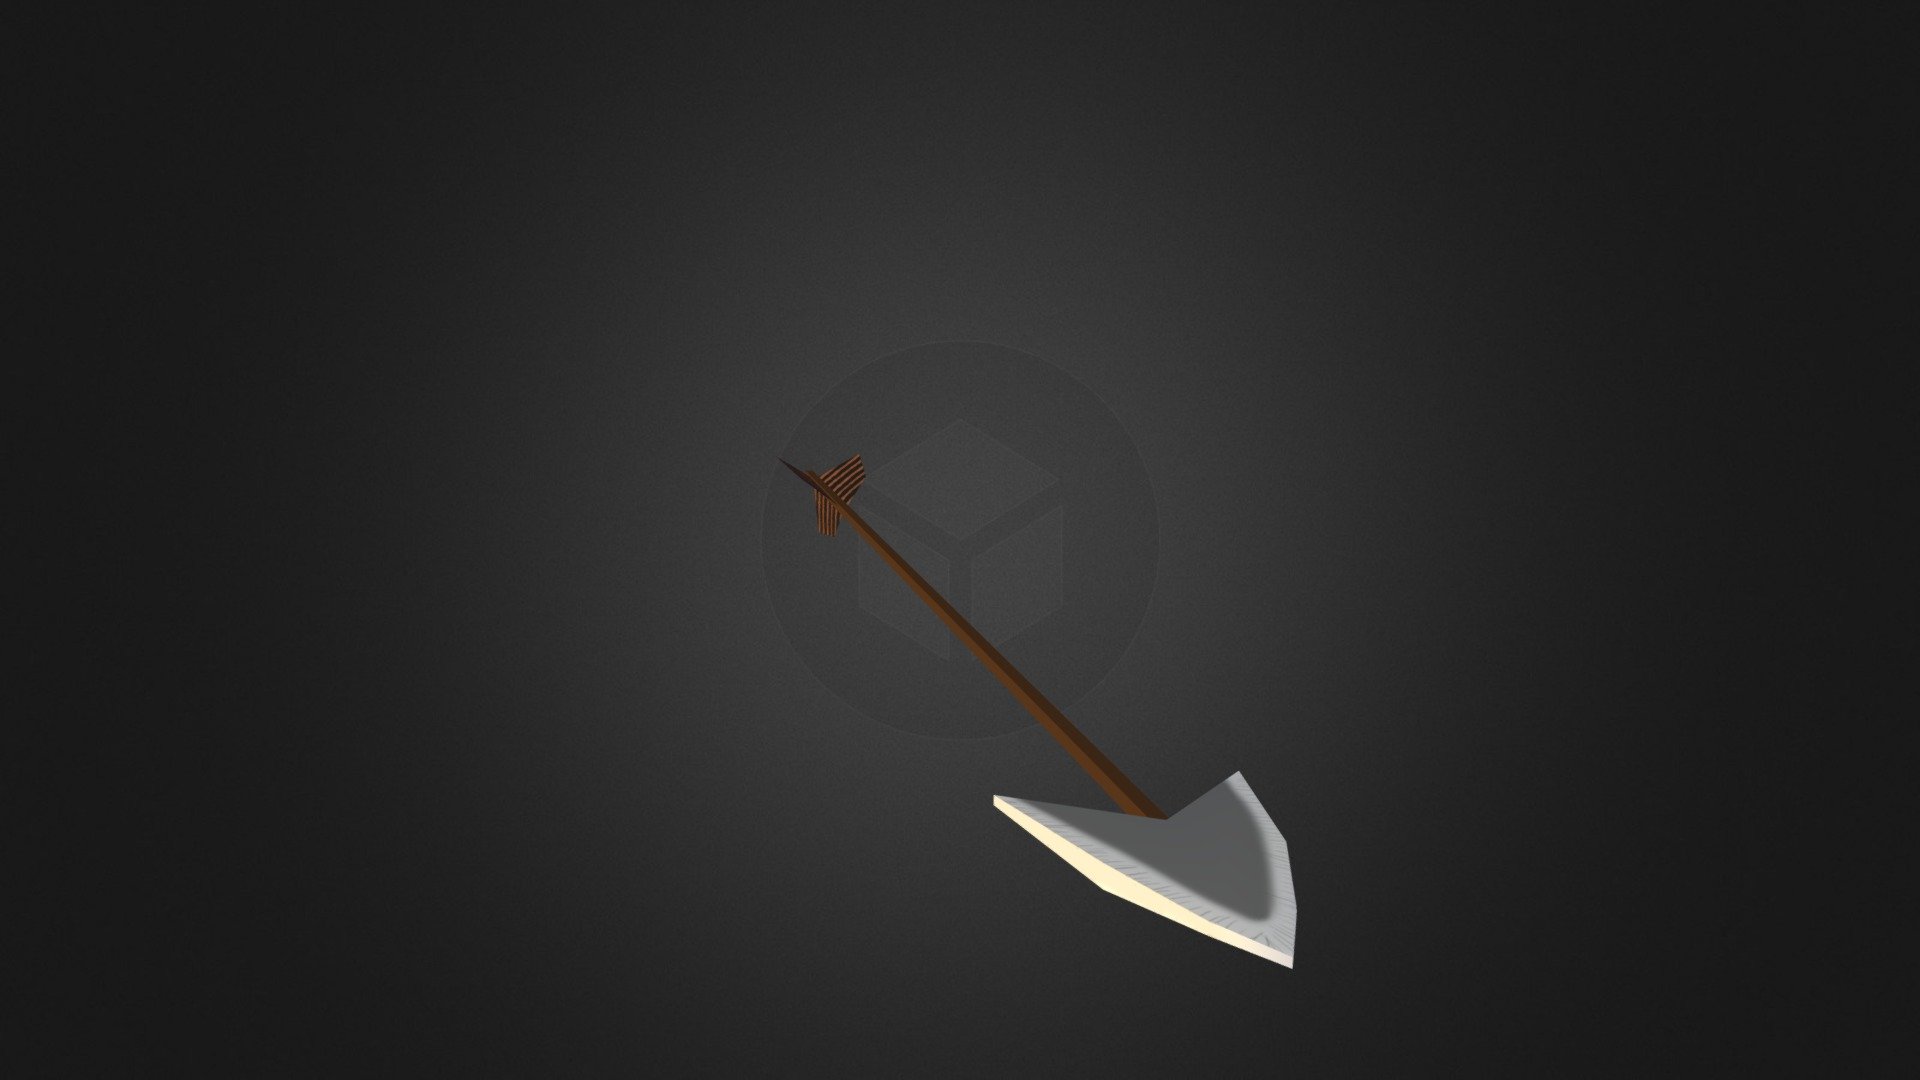 A low poly arrow in a cartoon design.
Modelisation with 3DS Max and polypainted with ZBrush for a handmade result 3d model